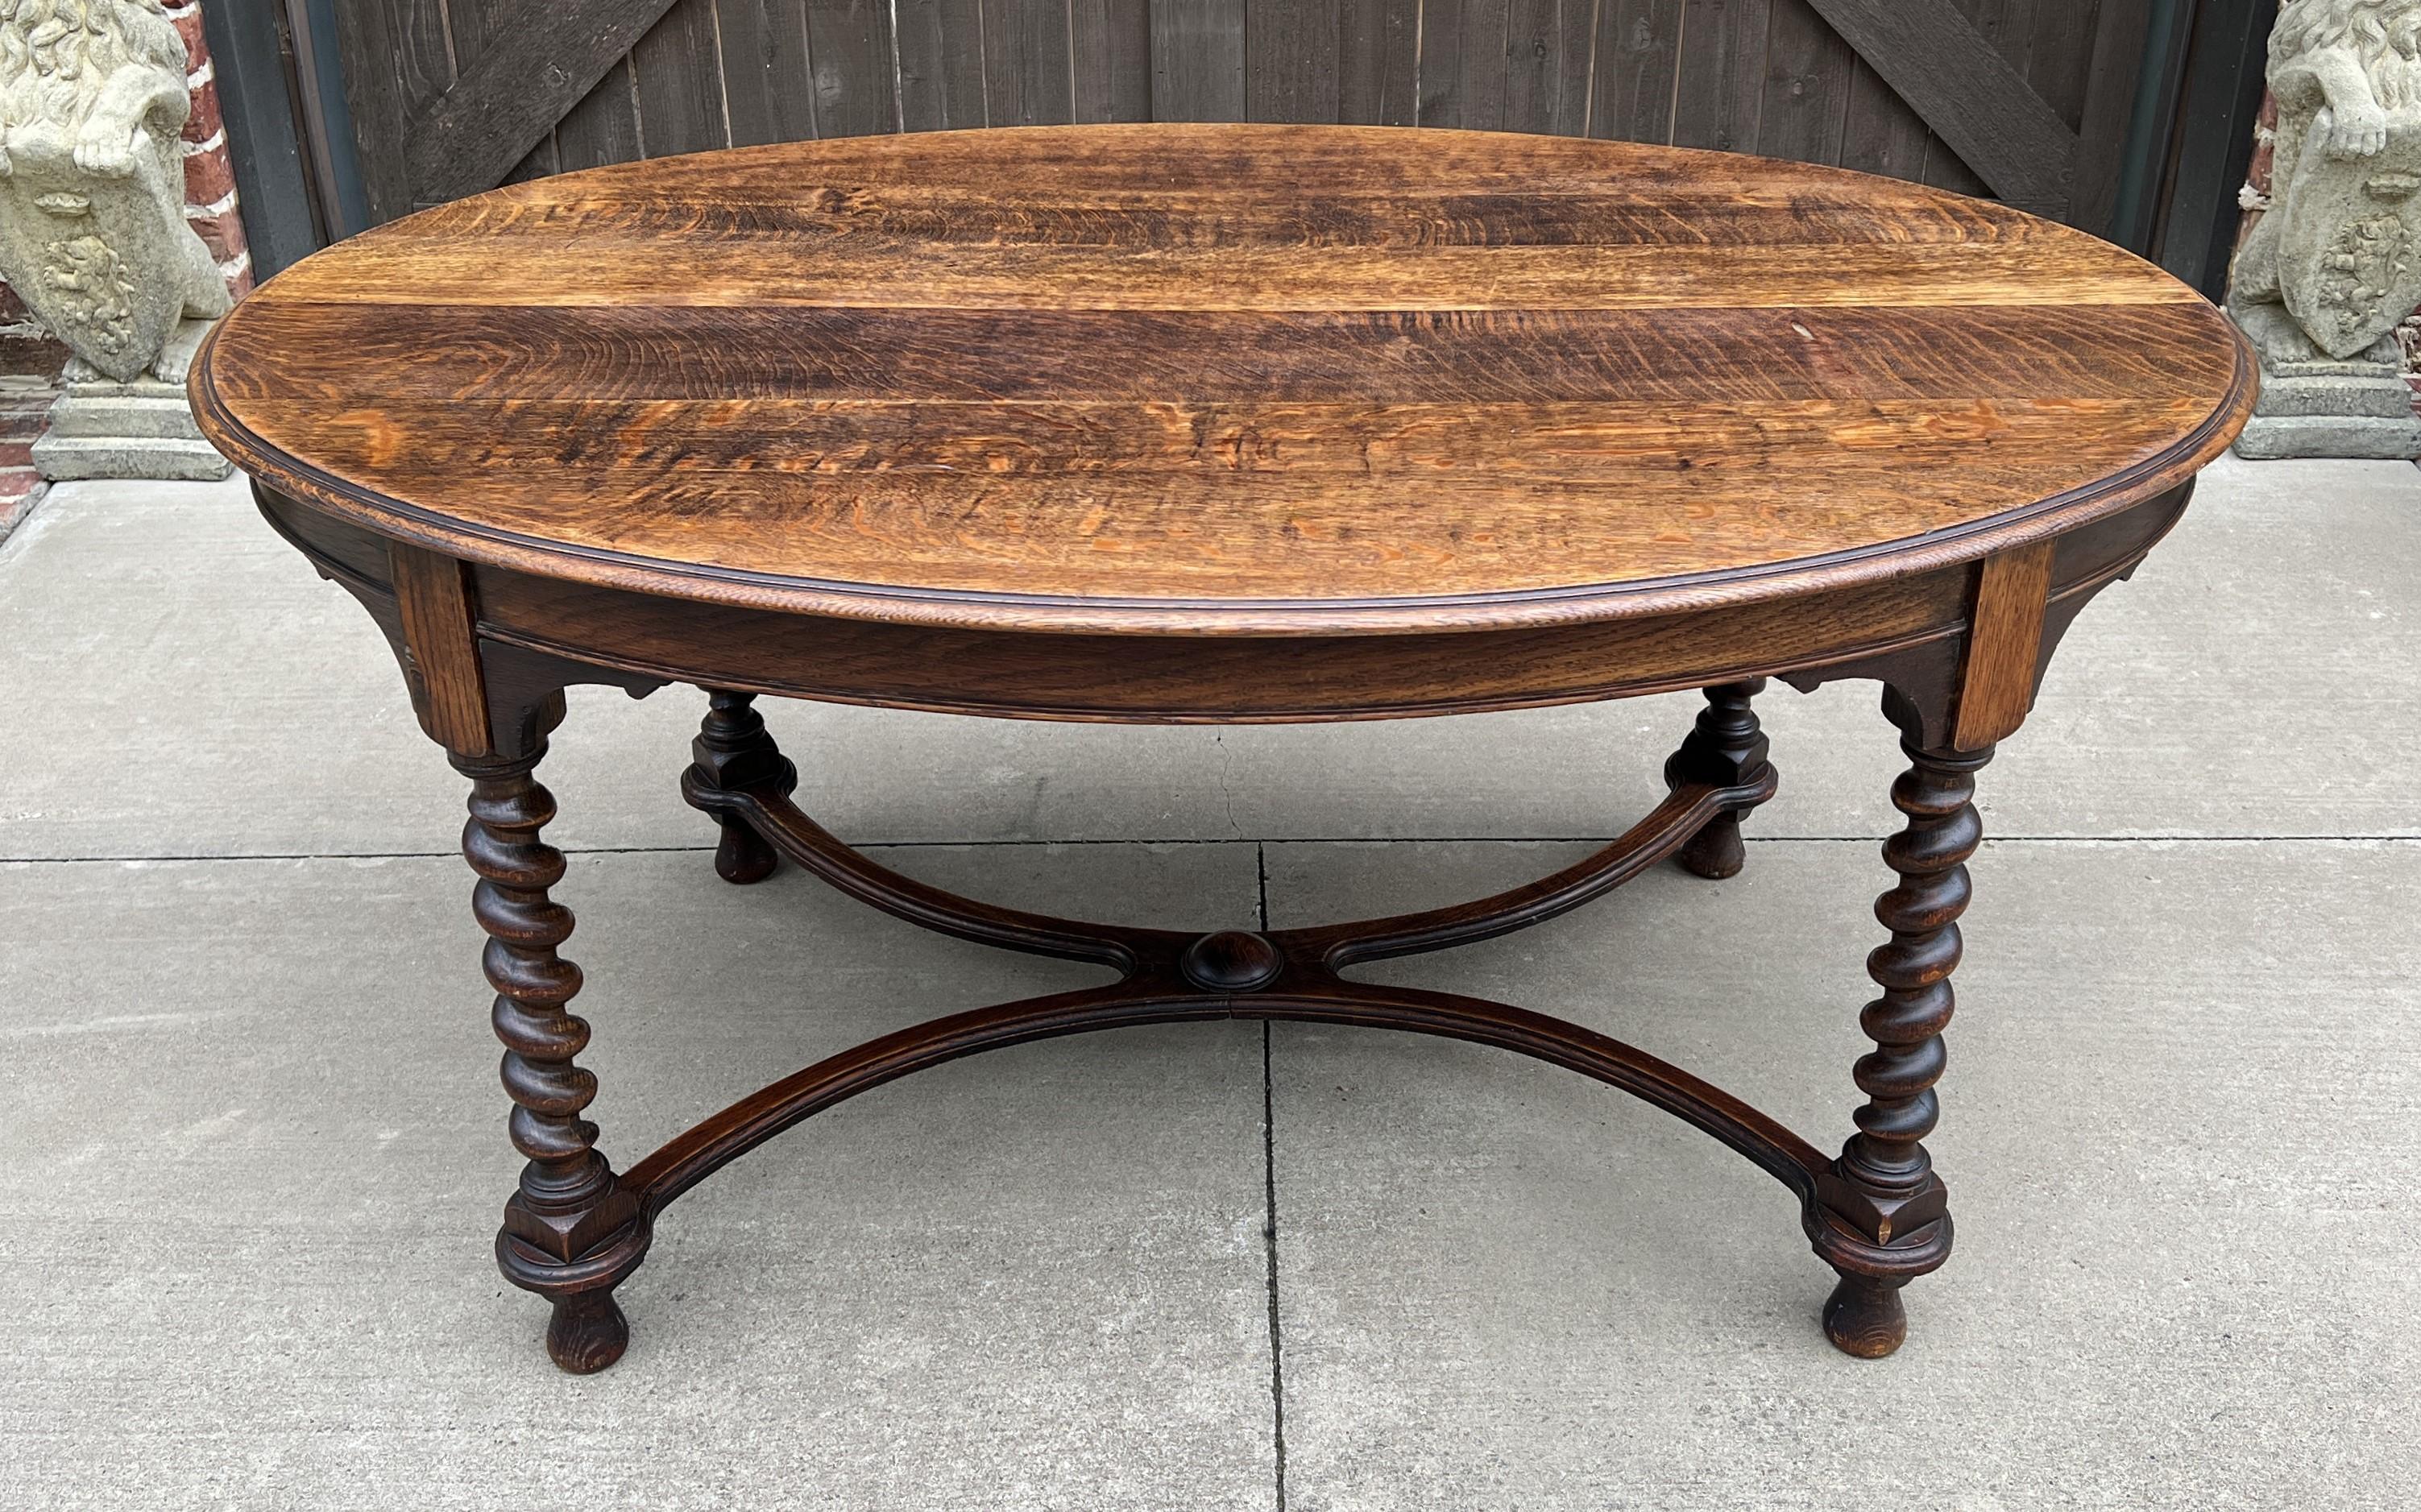 CHARMING Antique English OVAL Barley Twist Oak Dining, Breakfast, Card or Game Table~~circa 1920s-30s

Very versatile table with thick 3